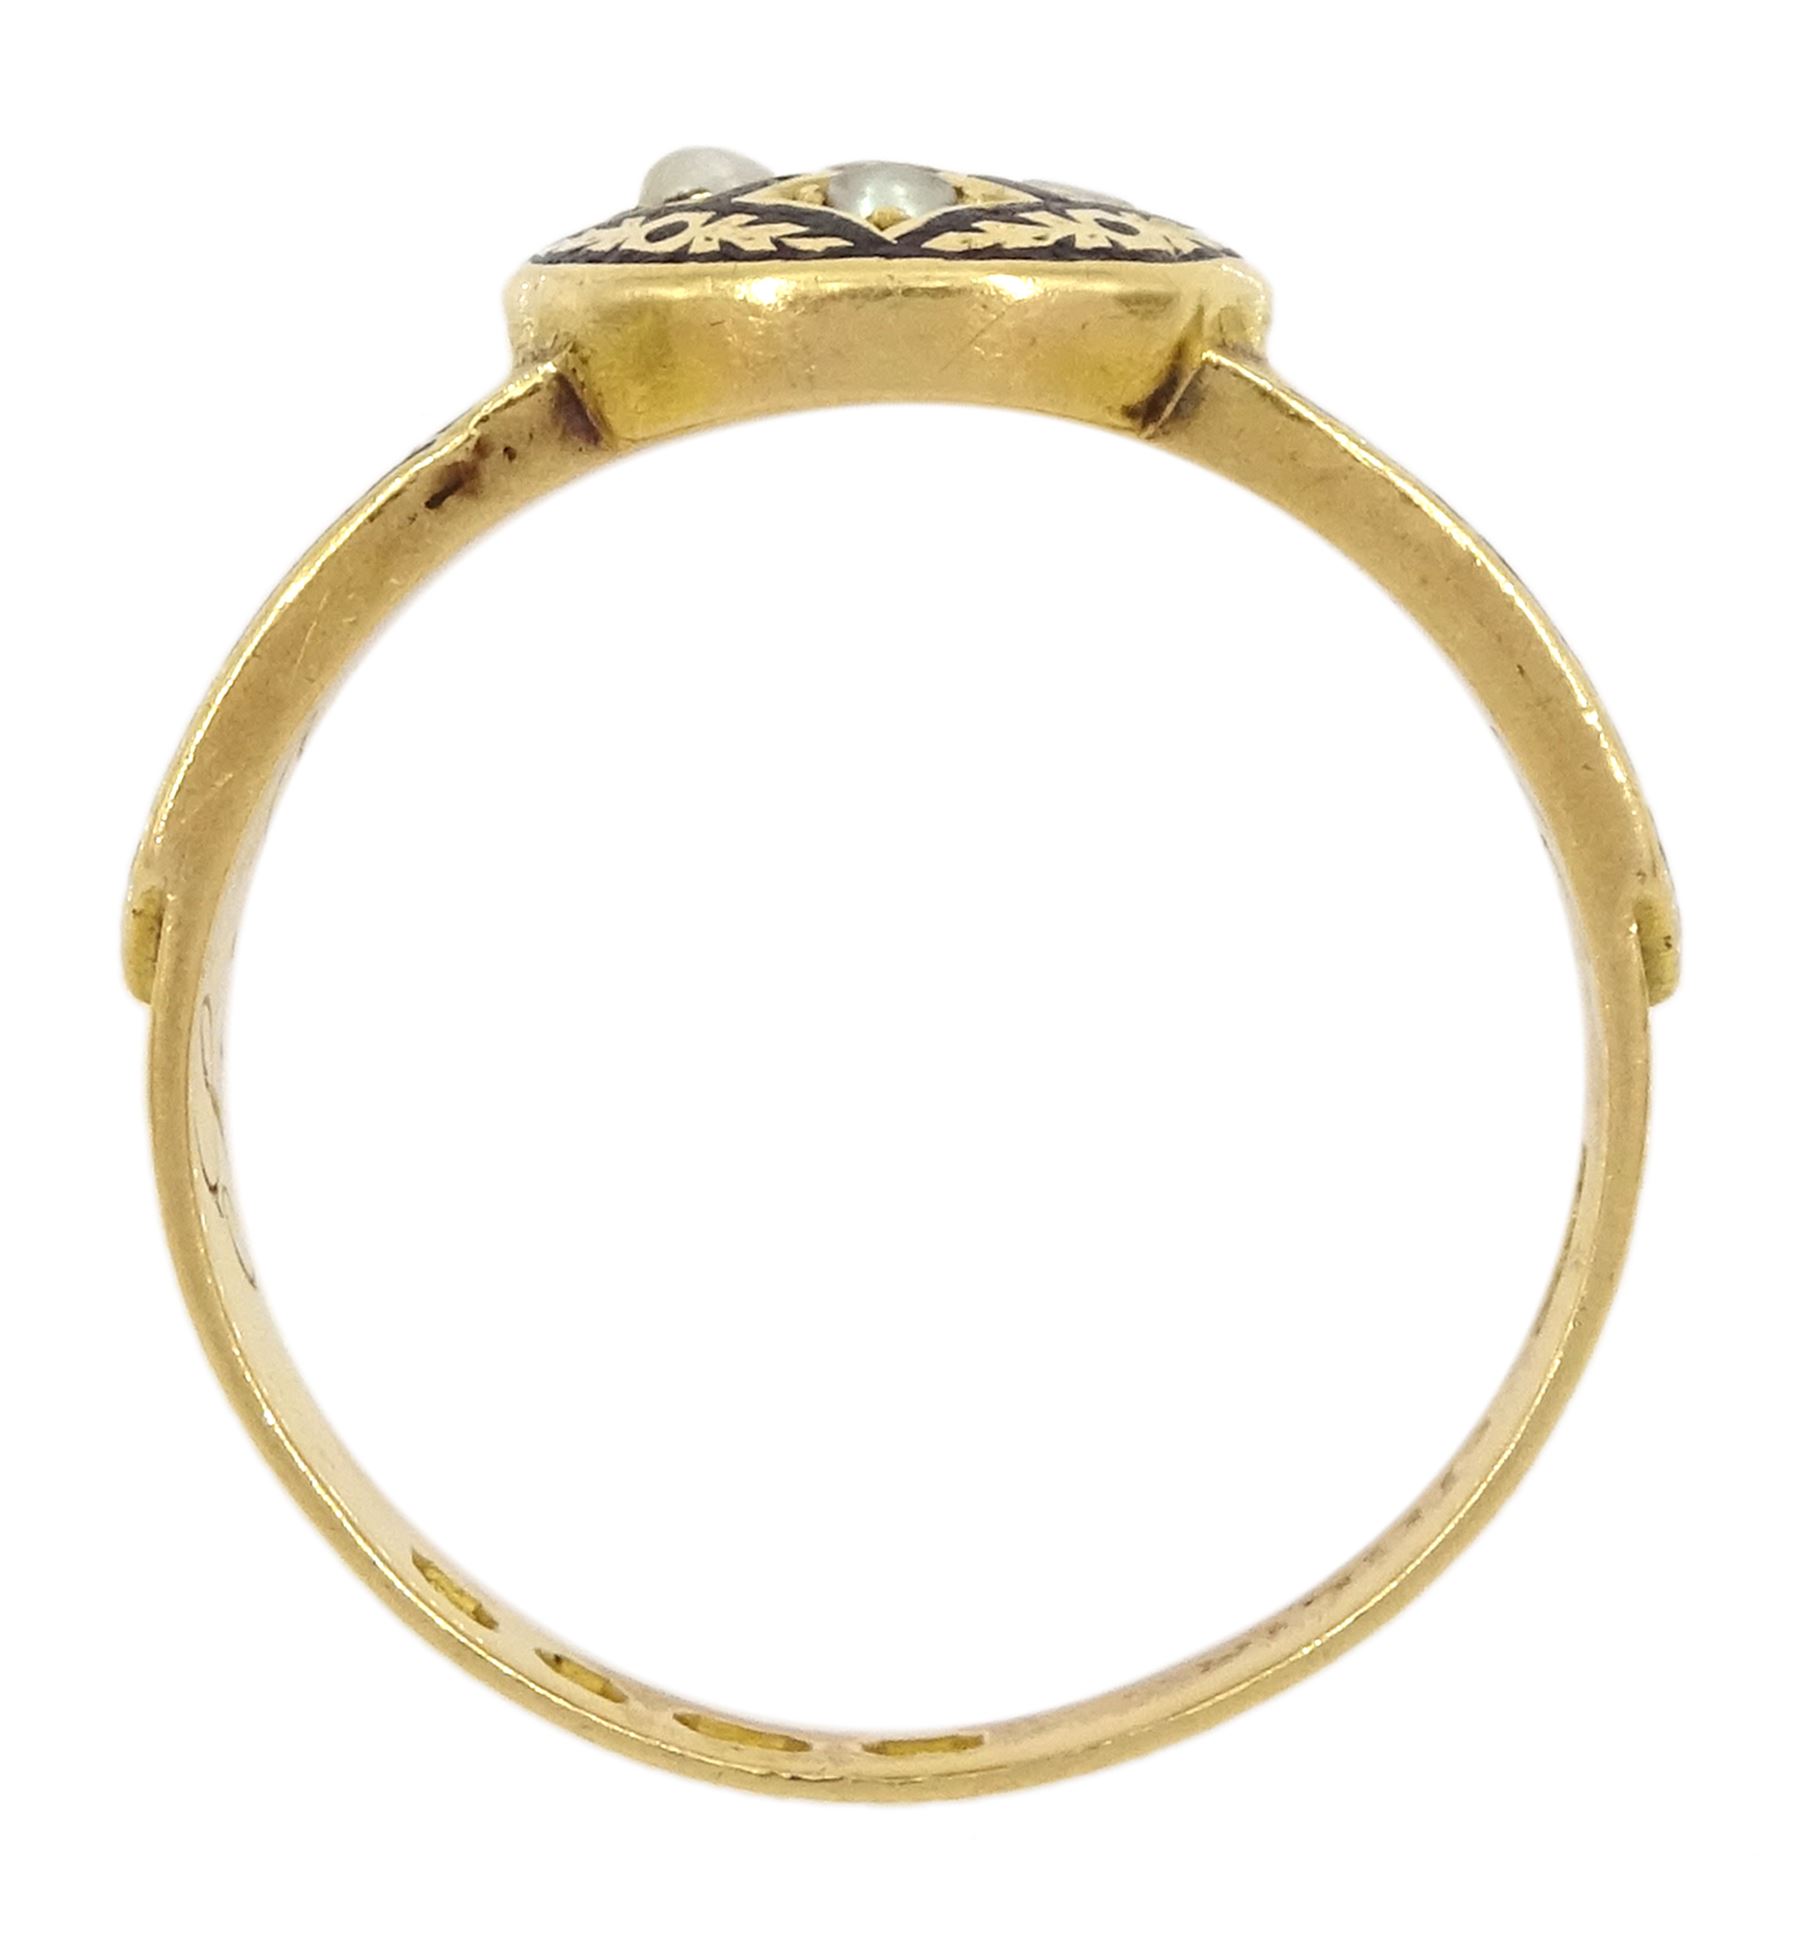 Victorian 18ct gold 'In Memory Of' memorial ring - Image 5 of 5